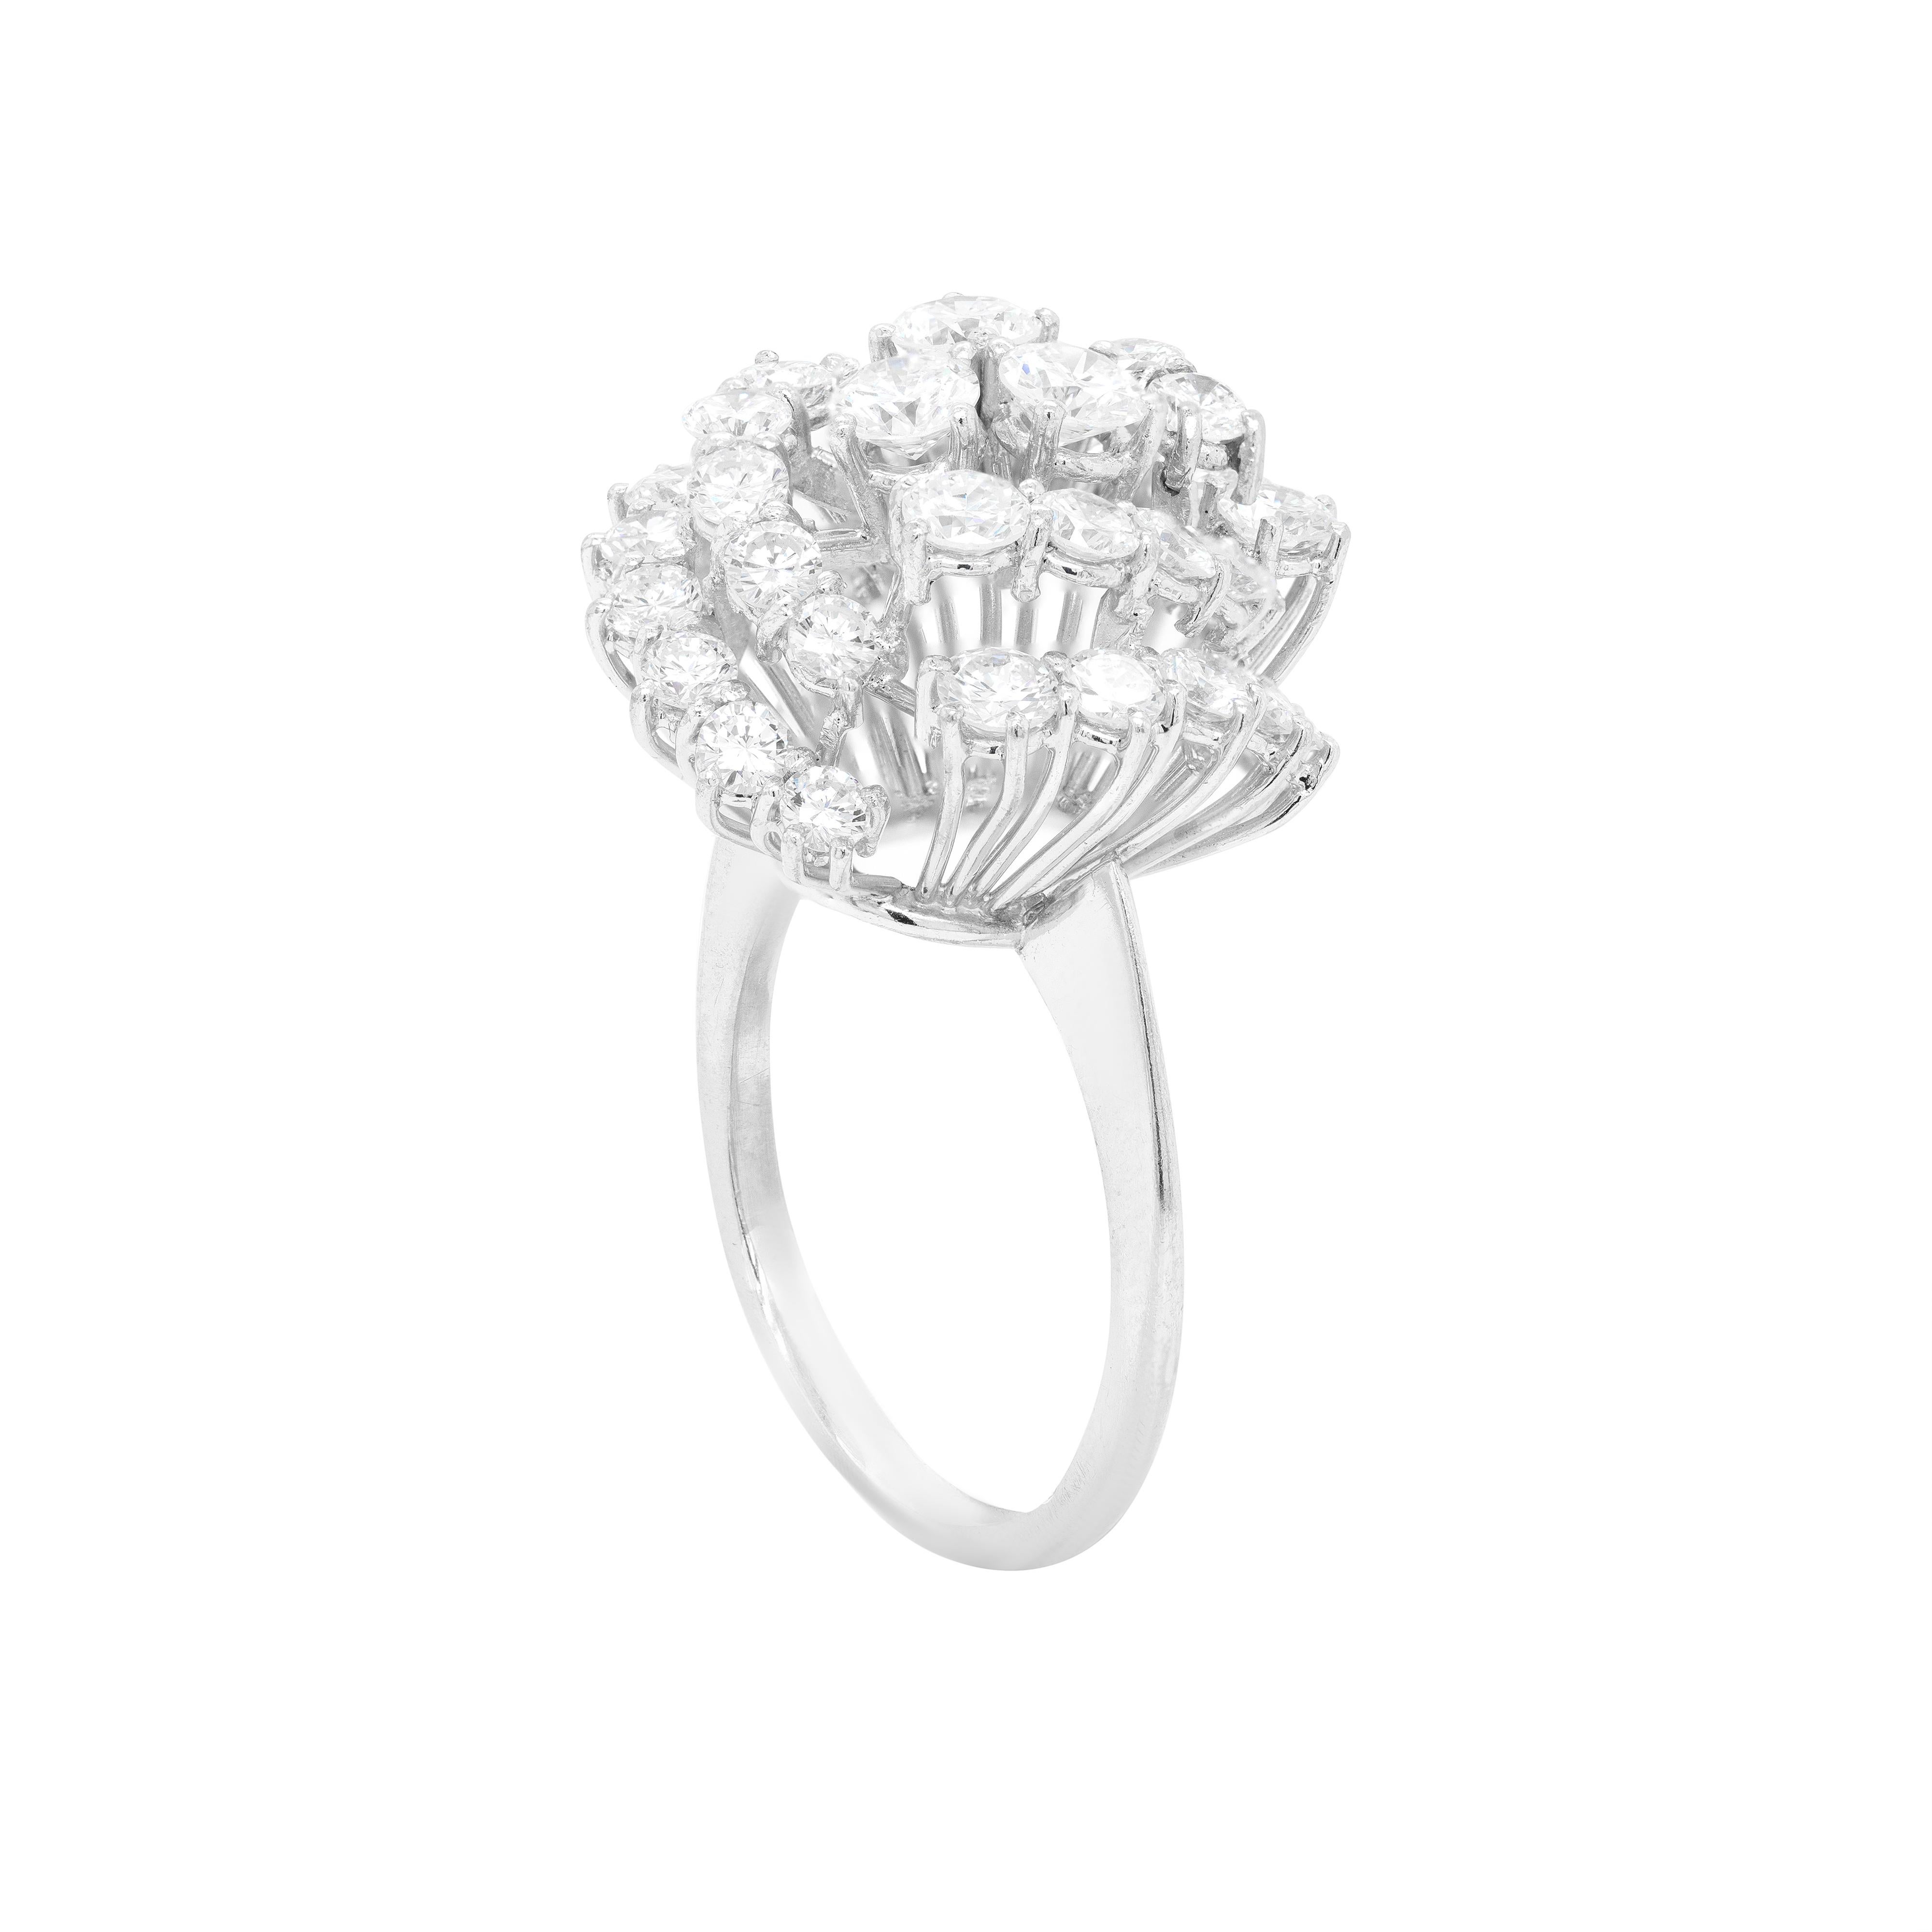 This gorgeous 18 carat white gold vintage ring is beautifully centred with 3 round brilliant cut diamonds, mounted in four claw, open back settings. Surrounding the centre stones there are three cascading asymmetrical swirls, each beautifully set